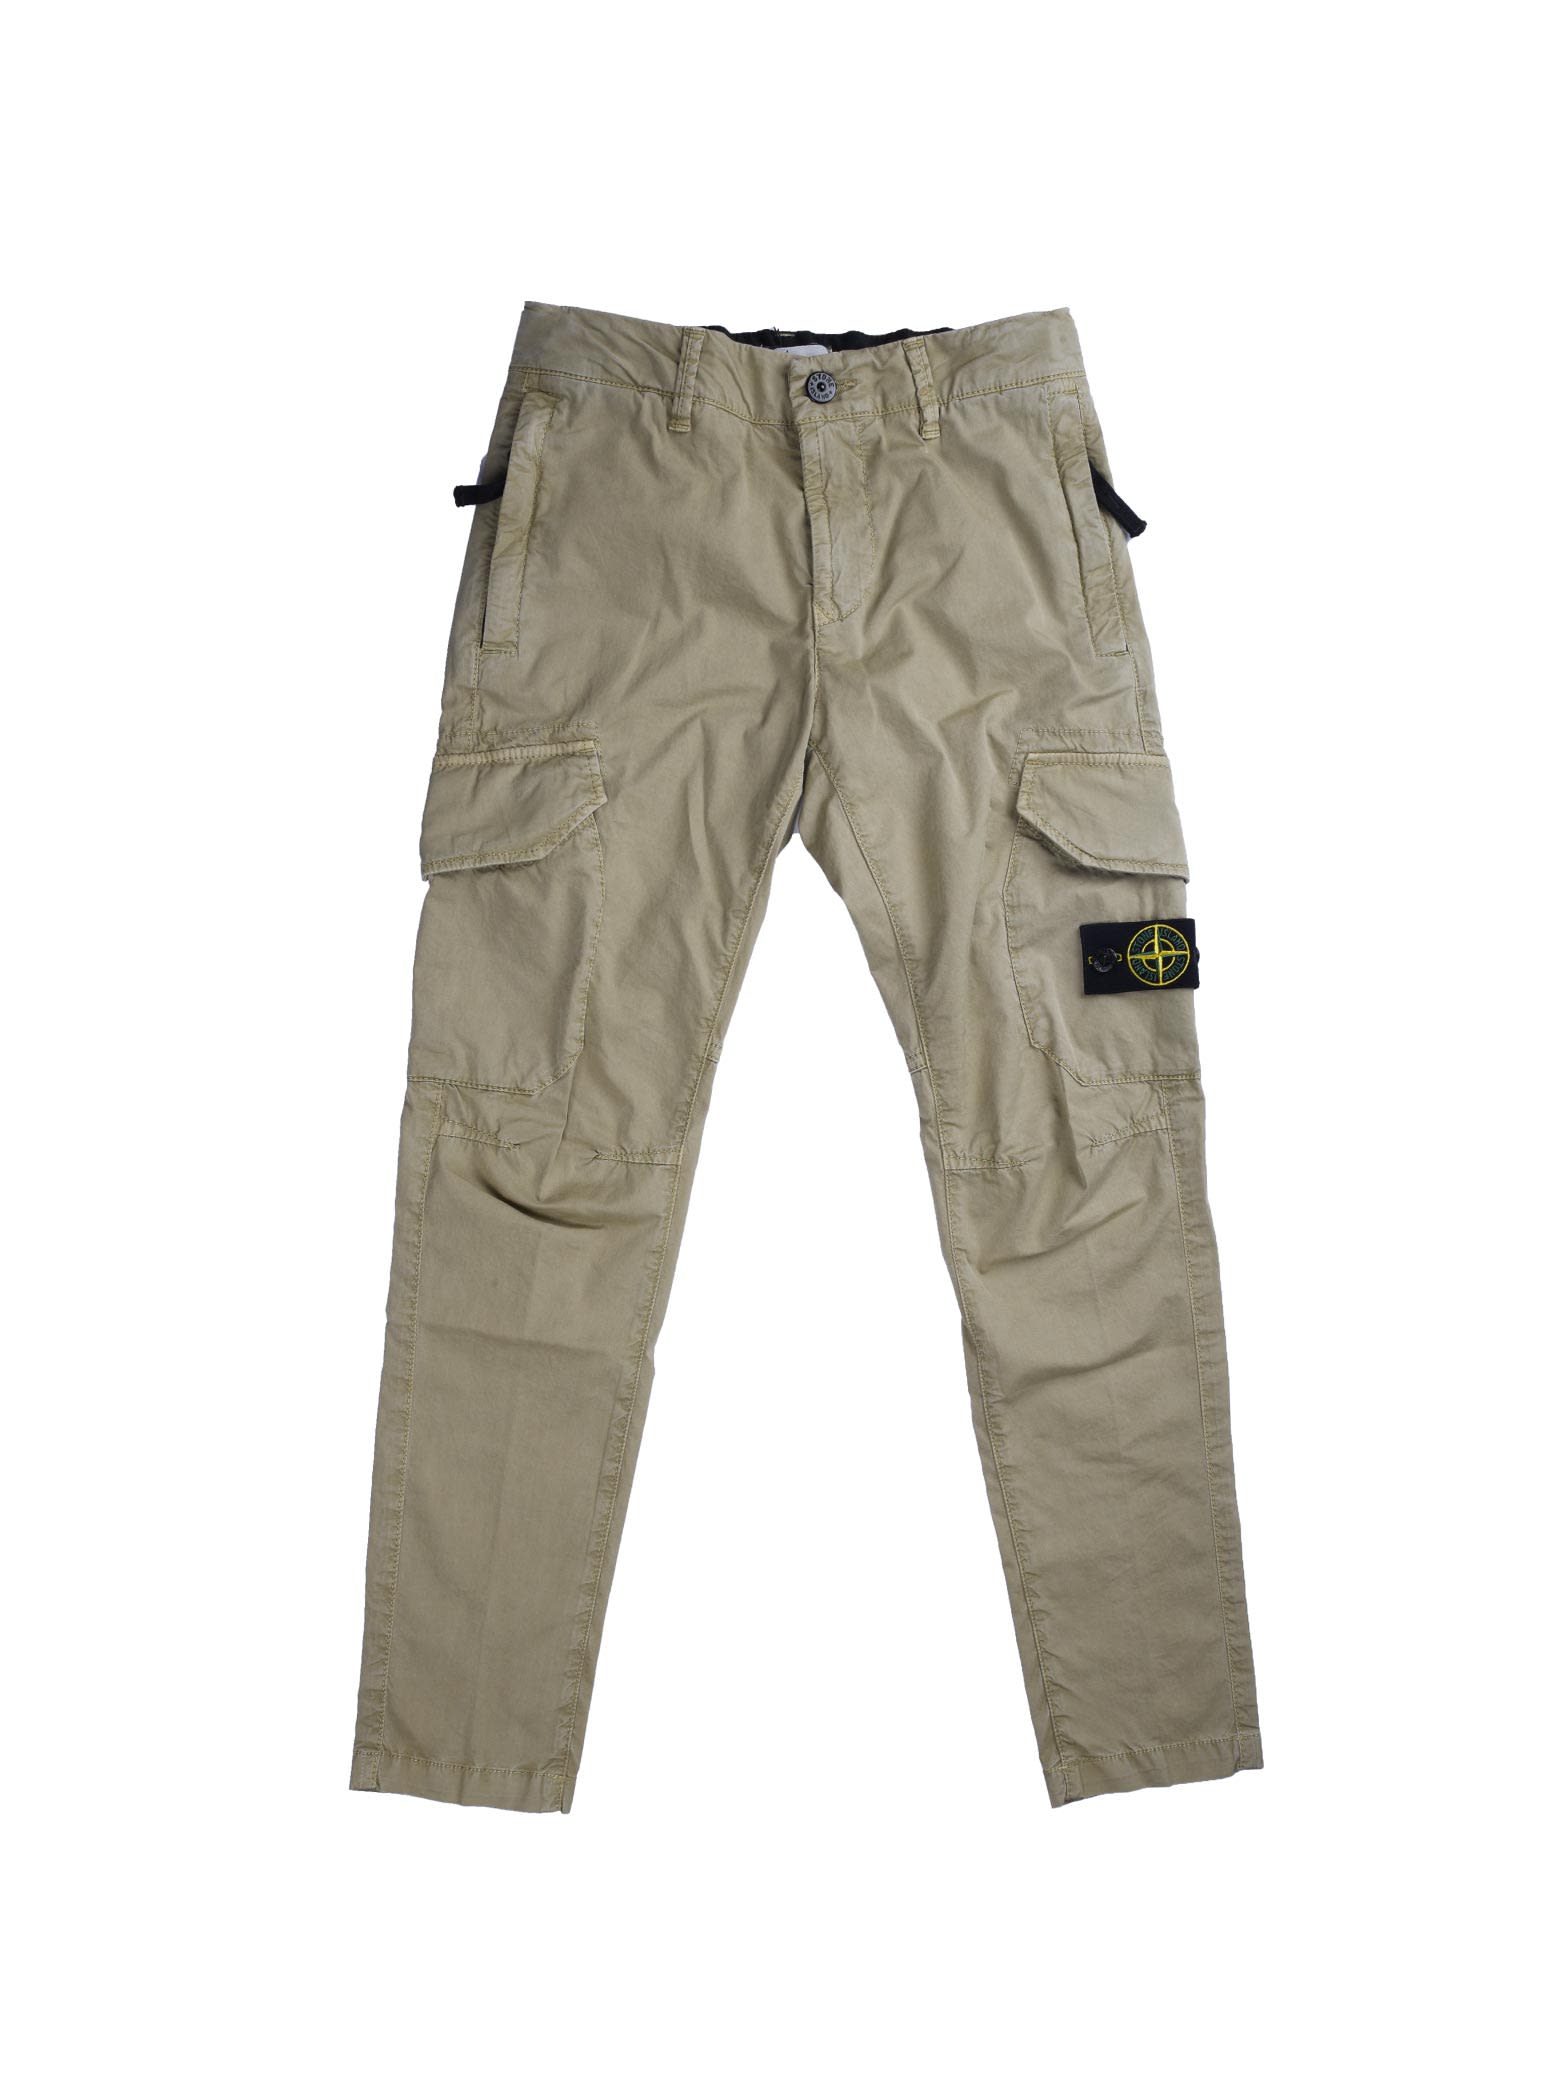 Stone Island Cotton Trousers With Beige Pockets